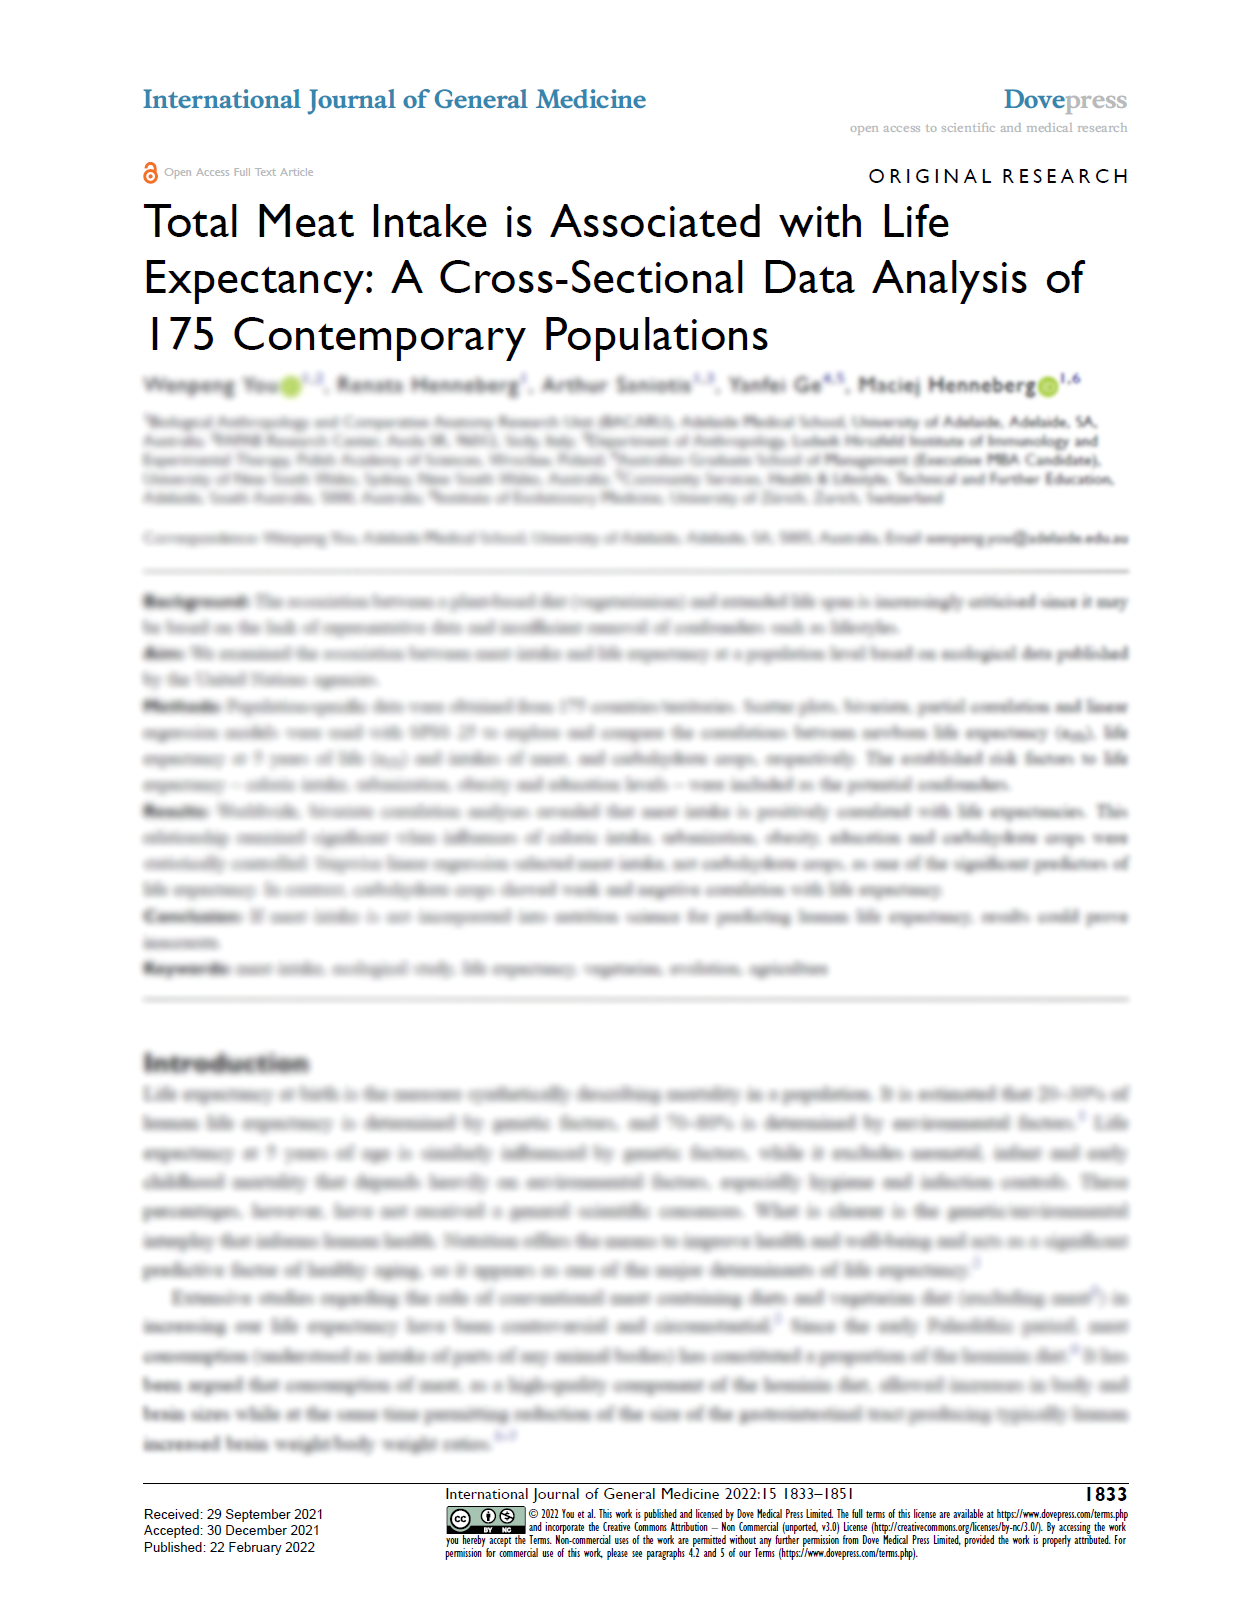 Meat Consumption Results in Higher Life Expectancy